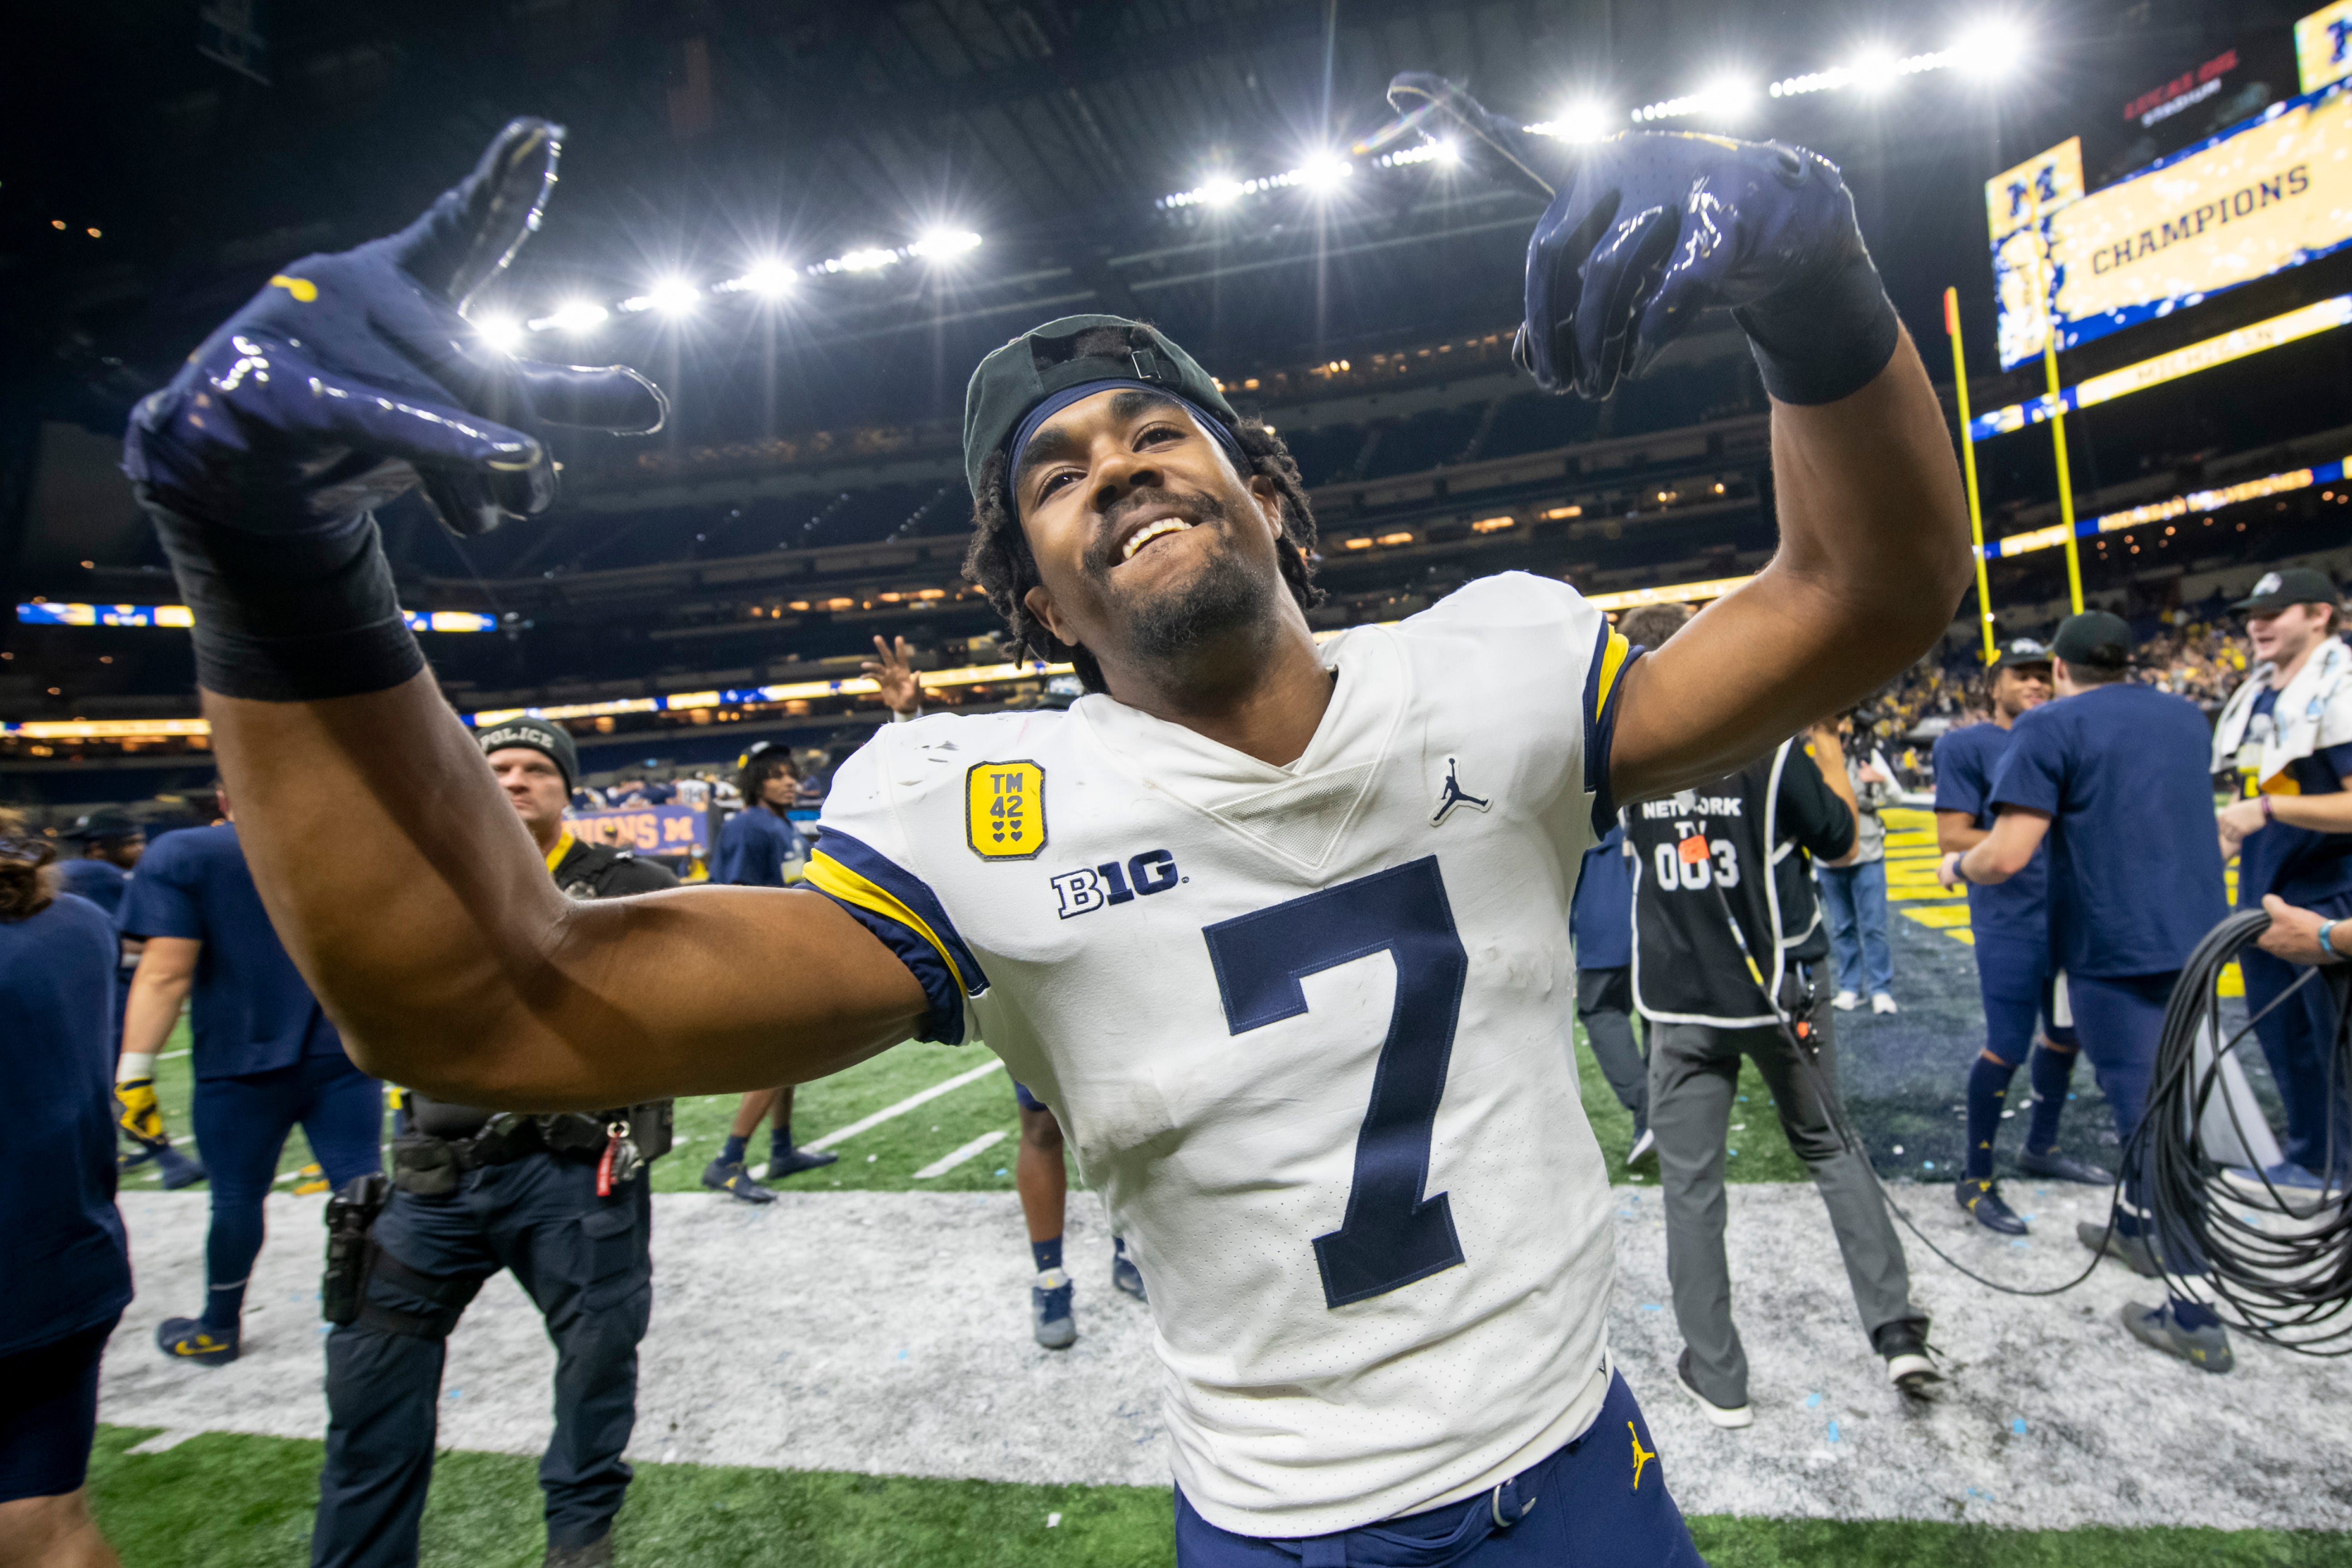 Michigan running back Donovan Edwards celebrates on the field after the University of Michigan defeated the University of Iowa 42-3 to win the Big Ten championship.